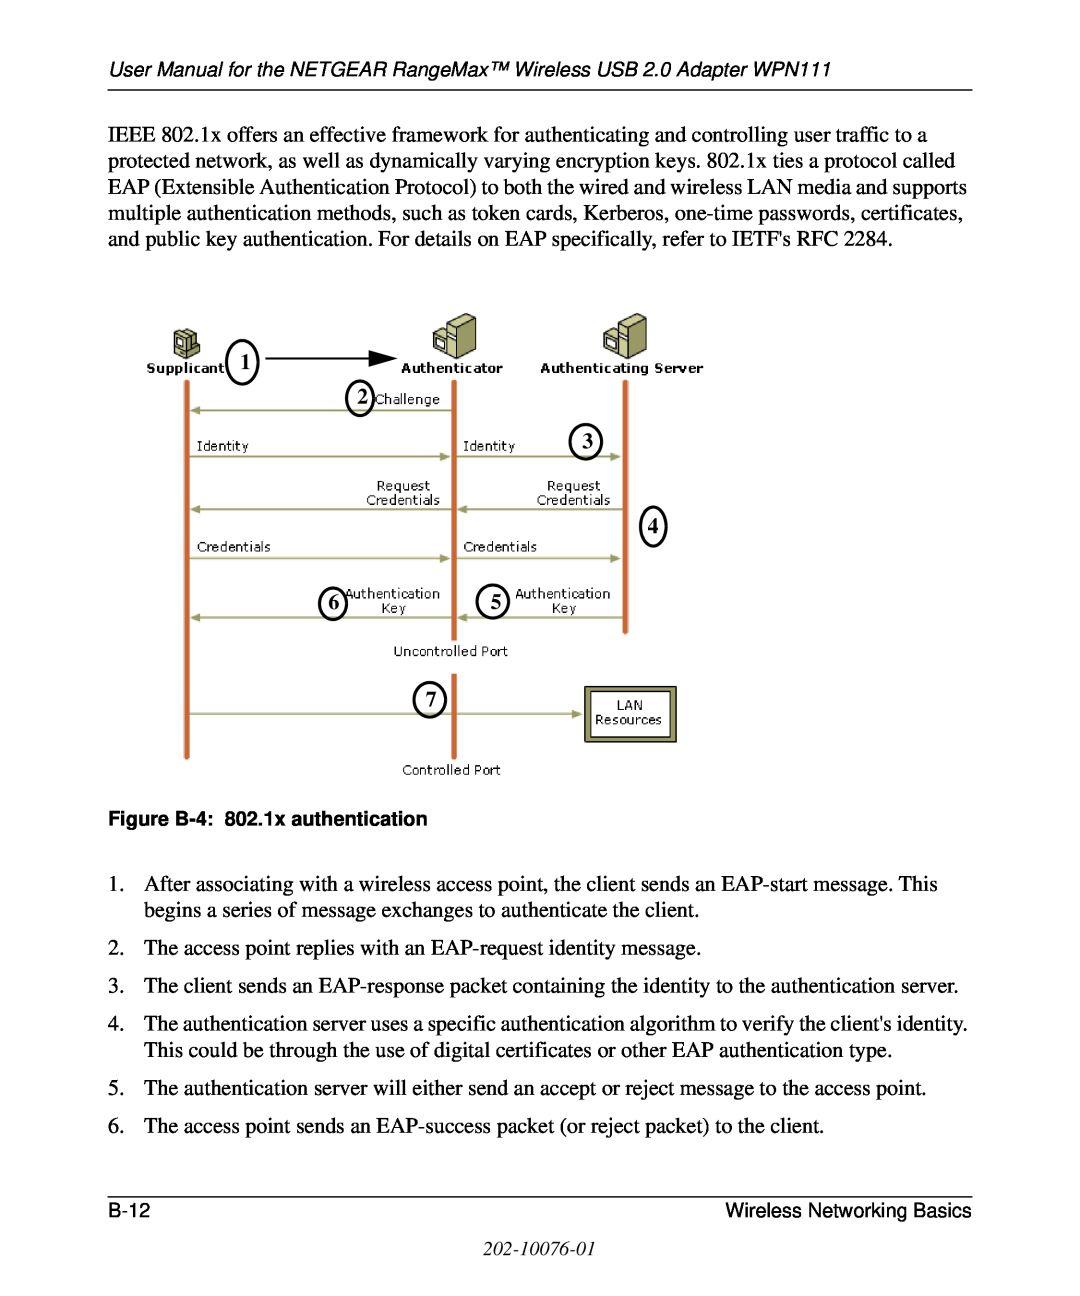 NETGEAR WPN111 user manual The access point replies with an EAP-request identity message 